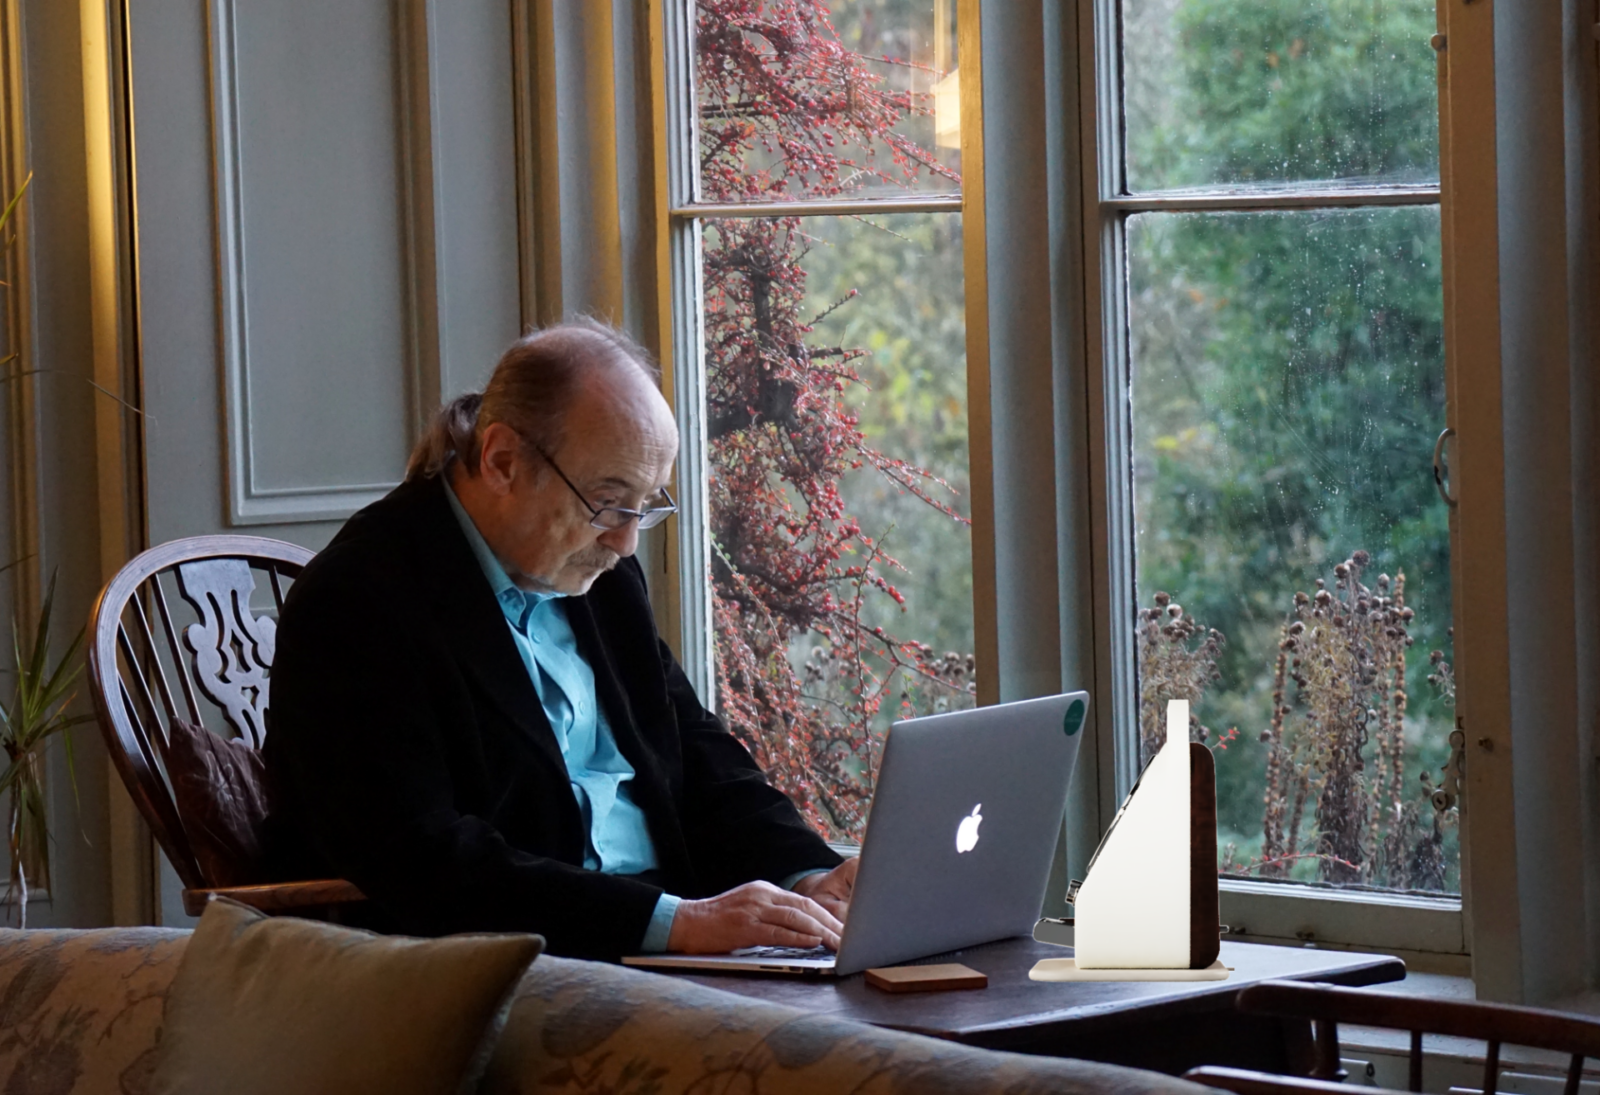 Elderly man with early onset dementia on a laptop with their connect device nearby.